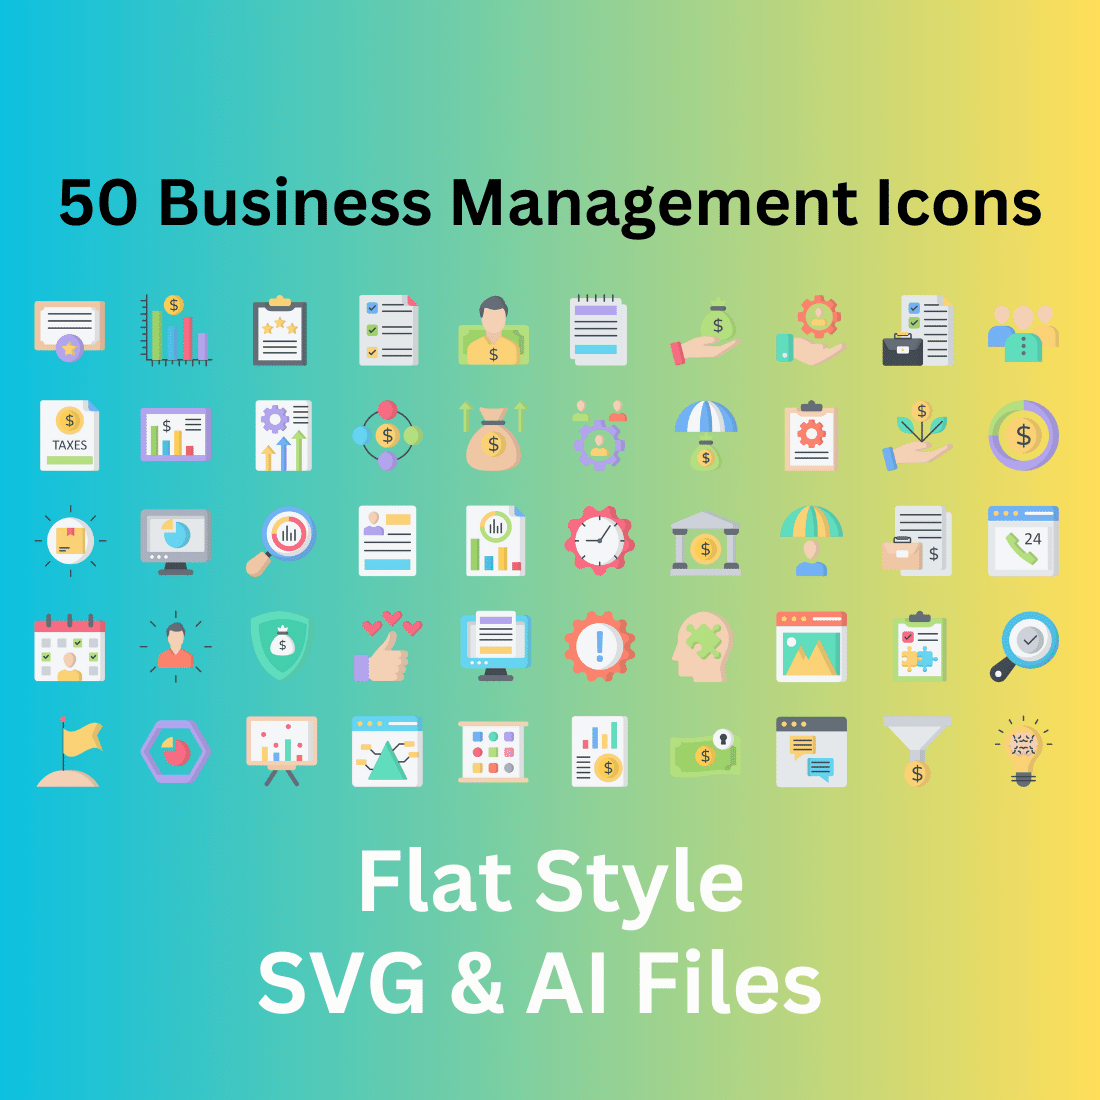 Business Management Icon Set 50 Flat Icons - SVG And AI Files cover image.